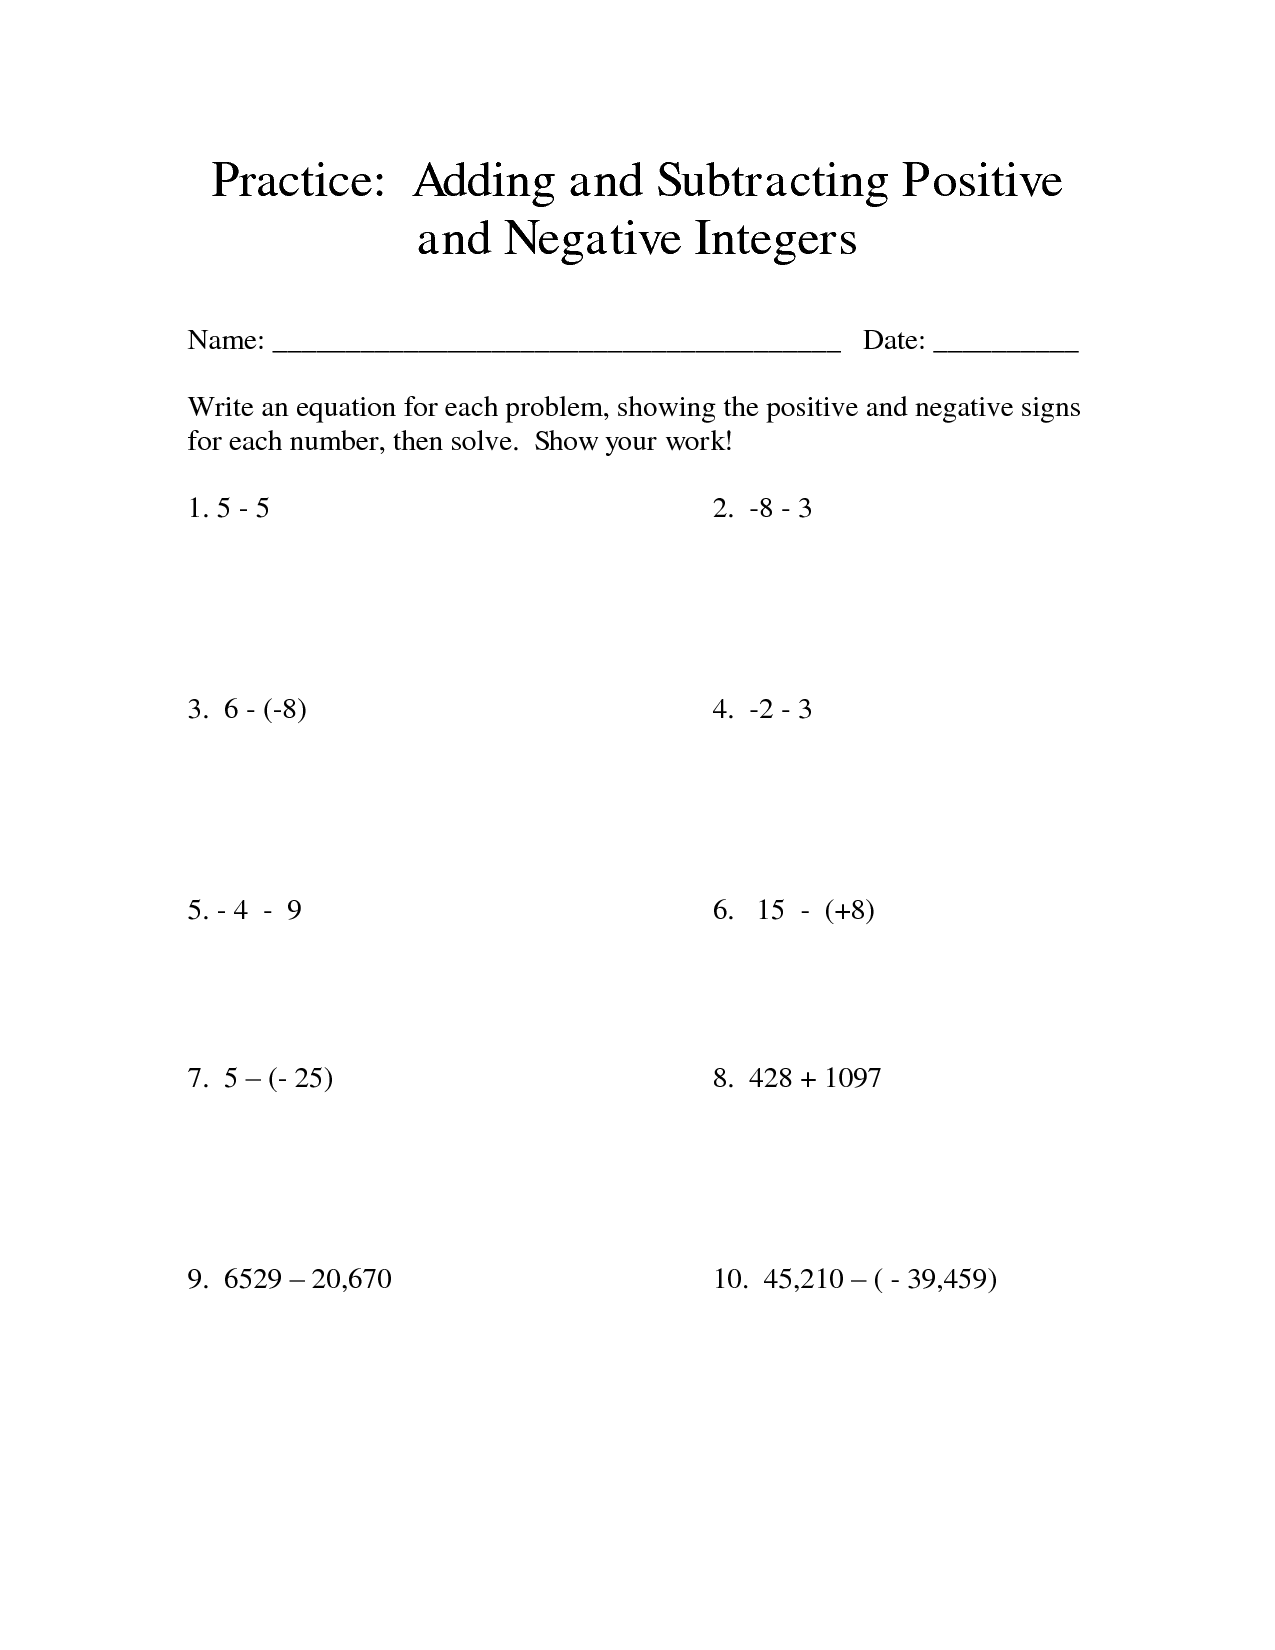 adding-and-subtracting-positive-and-negative-numbers-worksheet